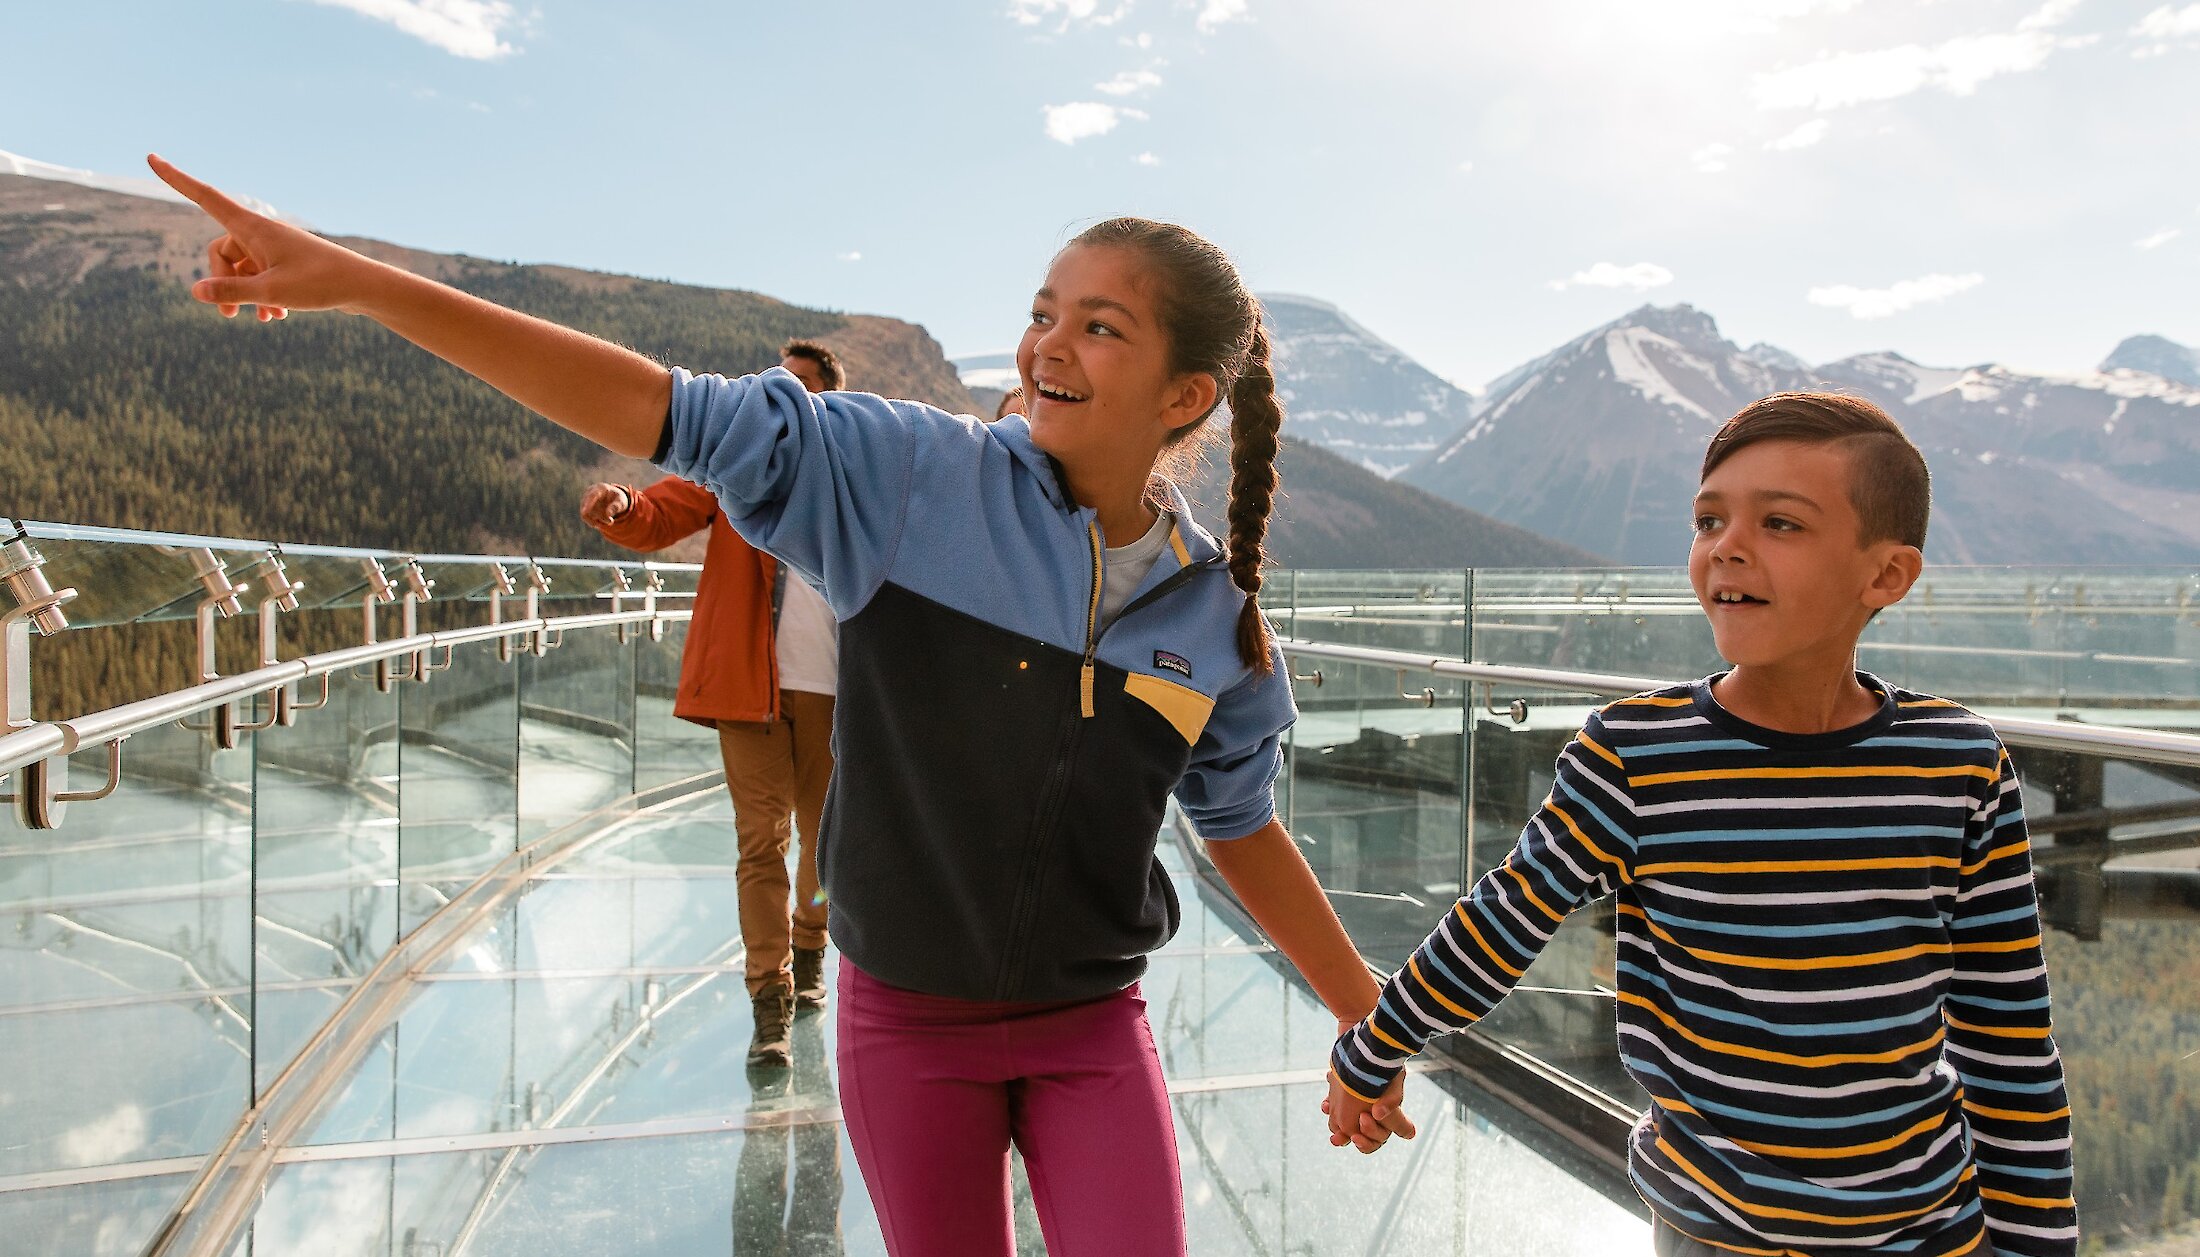 Two children looking out on the beautiful Mountain views at the glass bottom skybridge